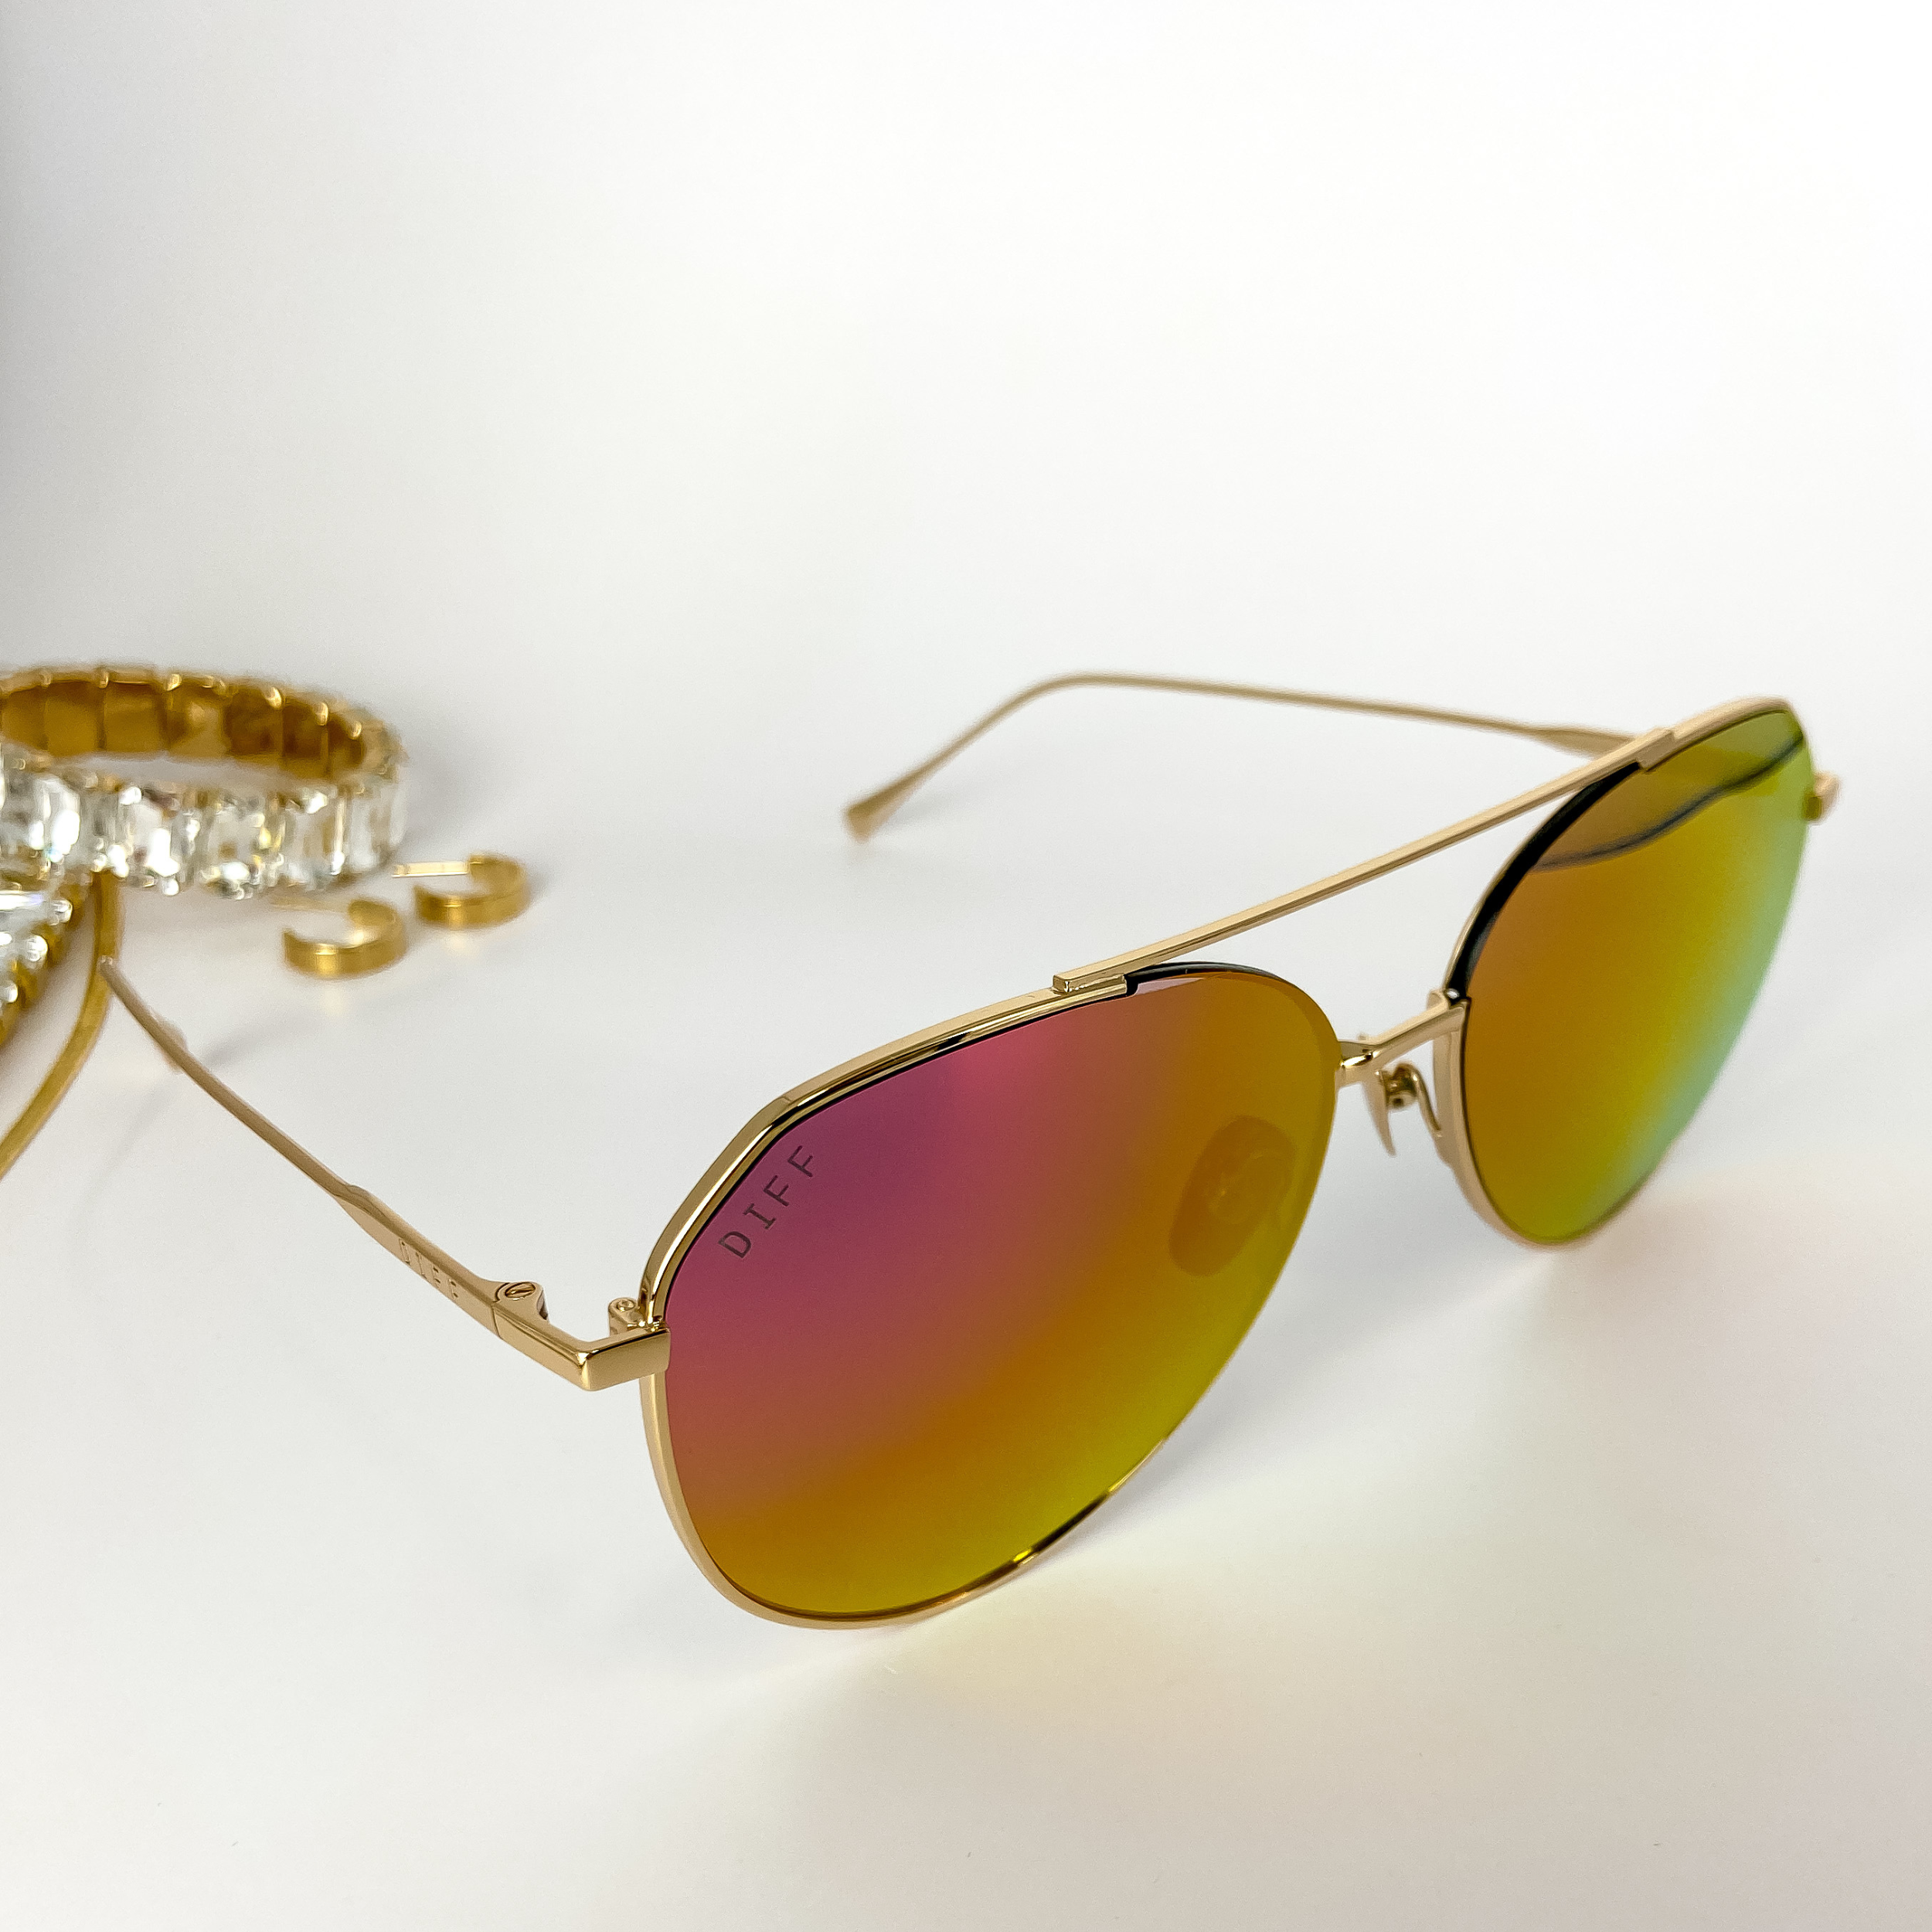 A pair of gold-tone aviator sunglasses with pink and gold mirror lenses. These sunglasses are pictured on a white background with gold jewelry.